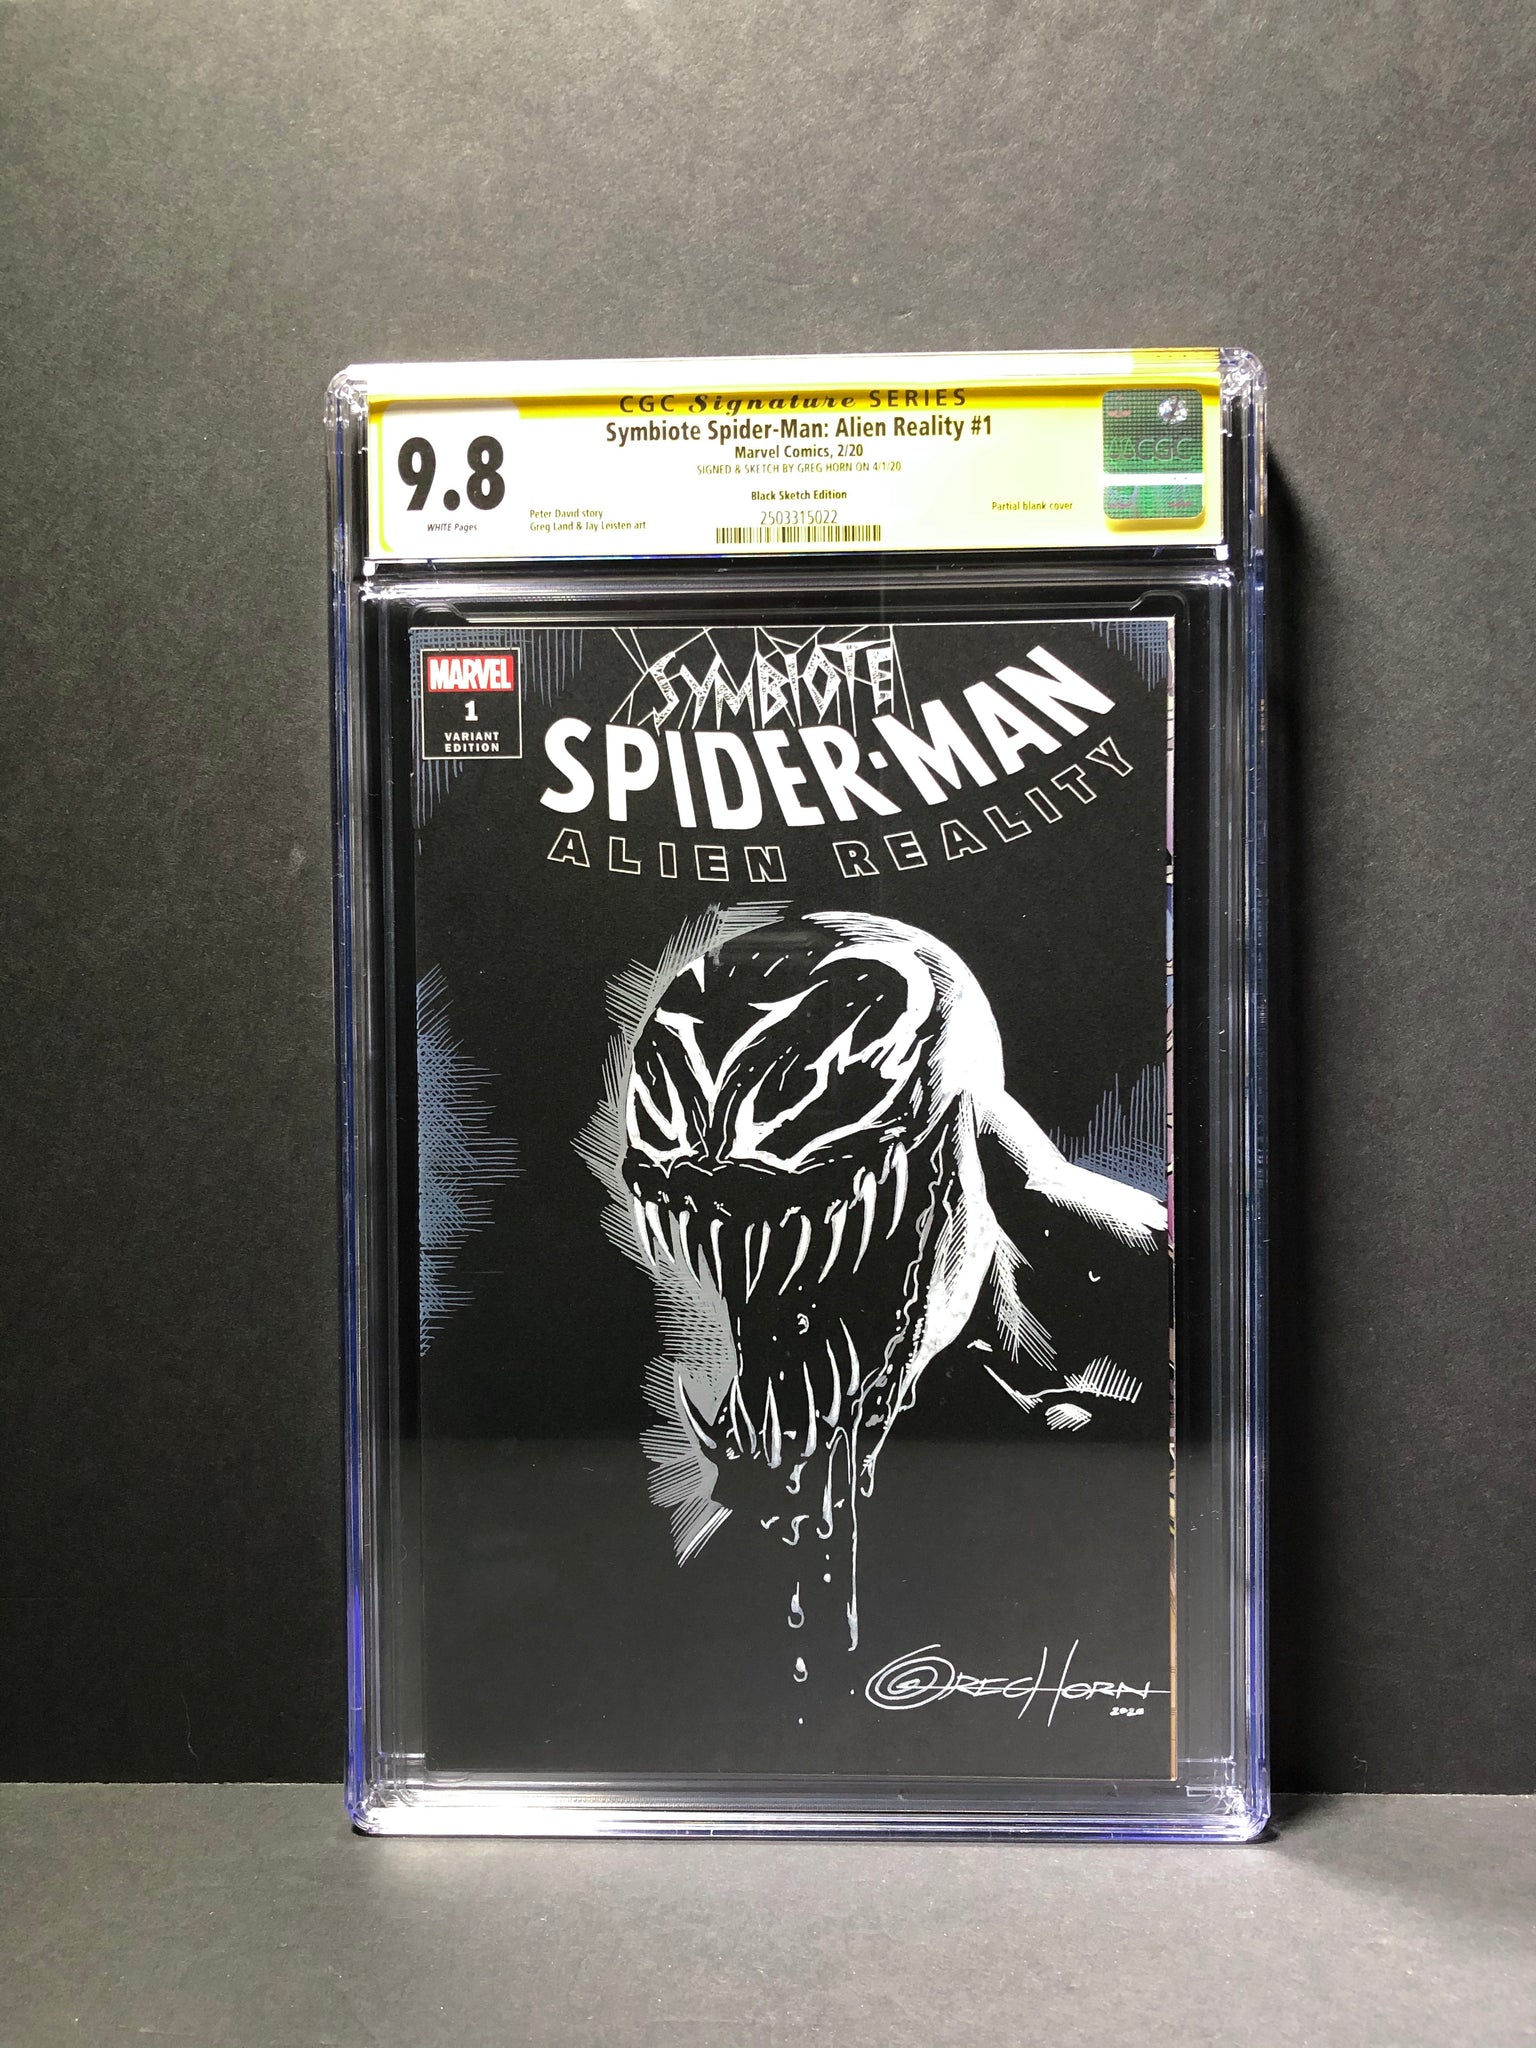 Symbiote Spider-Man Altered Reality CGC 9.8 Signature Series Signed and Sketched by Greg Horn